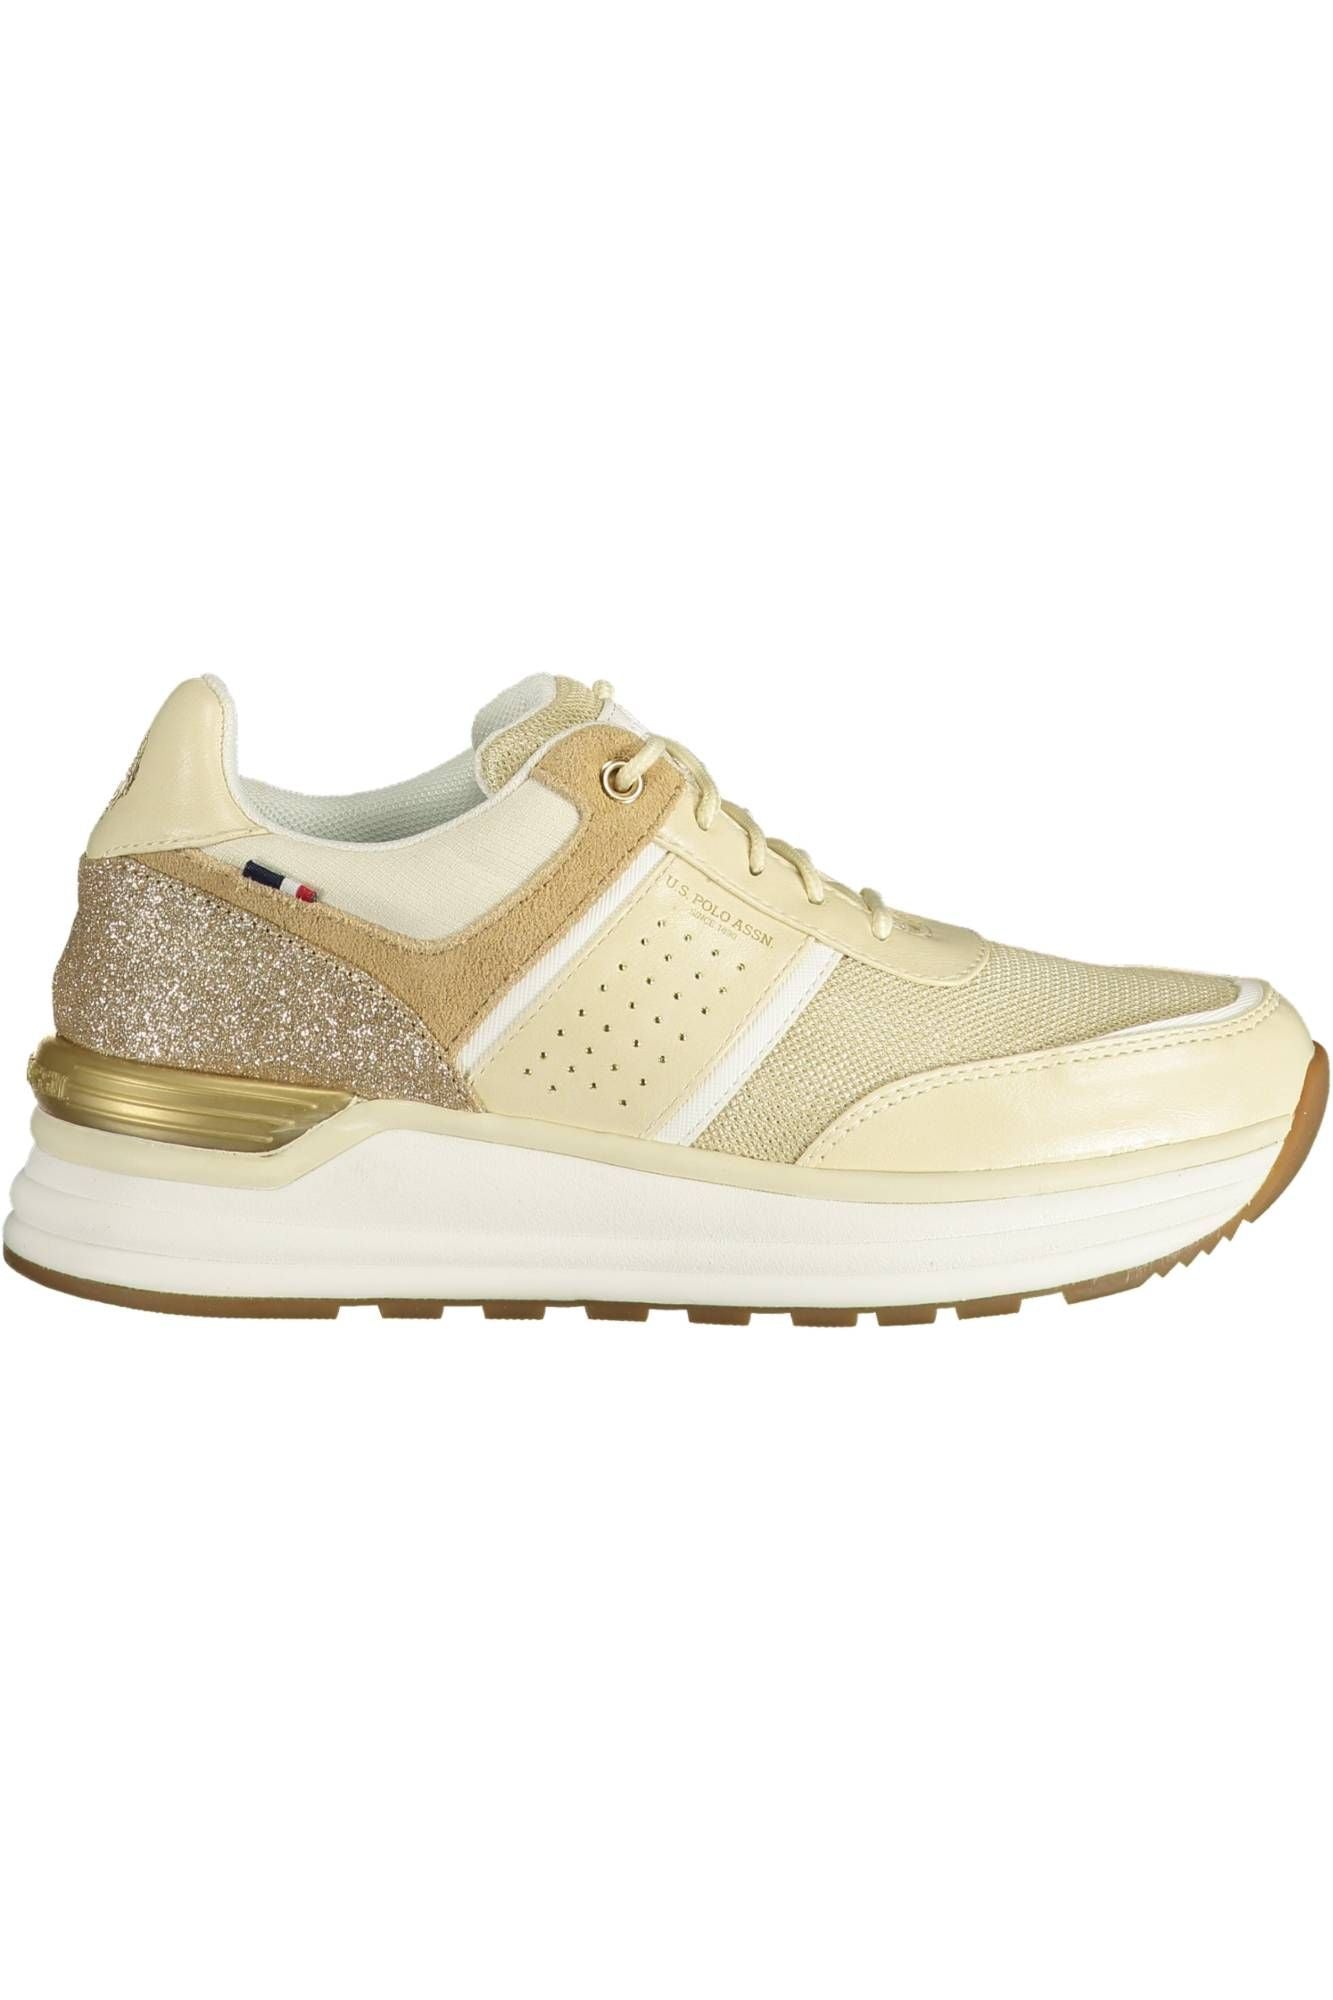 U.S. POLO ASSN. Beige ECO SUEDE Lace-up Sneakers